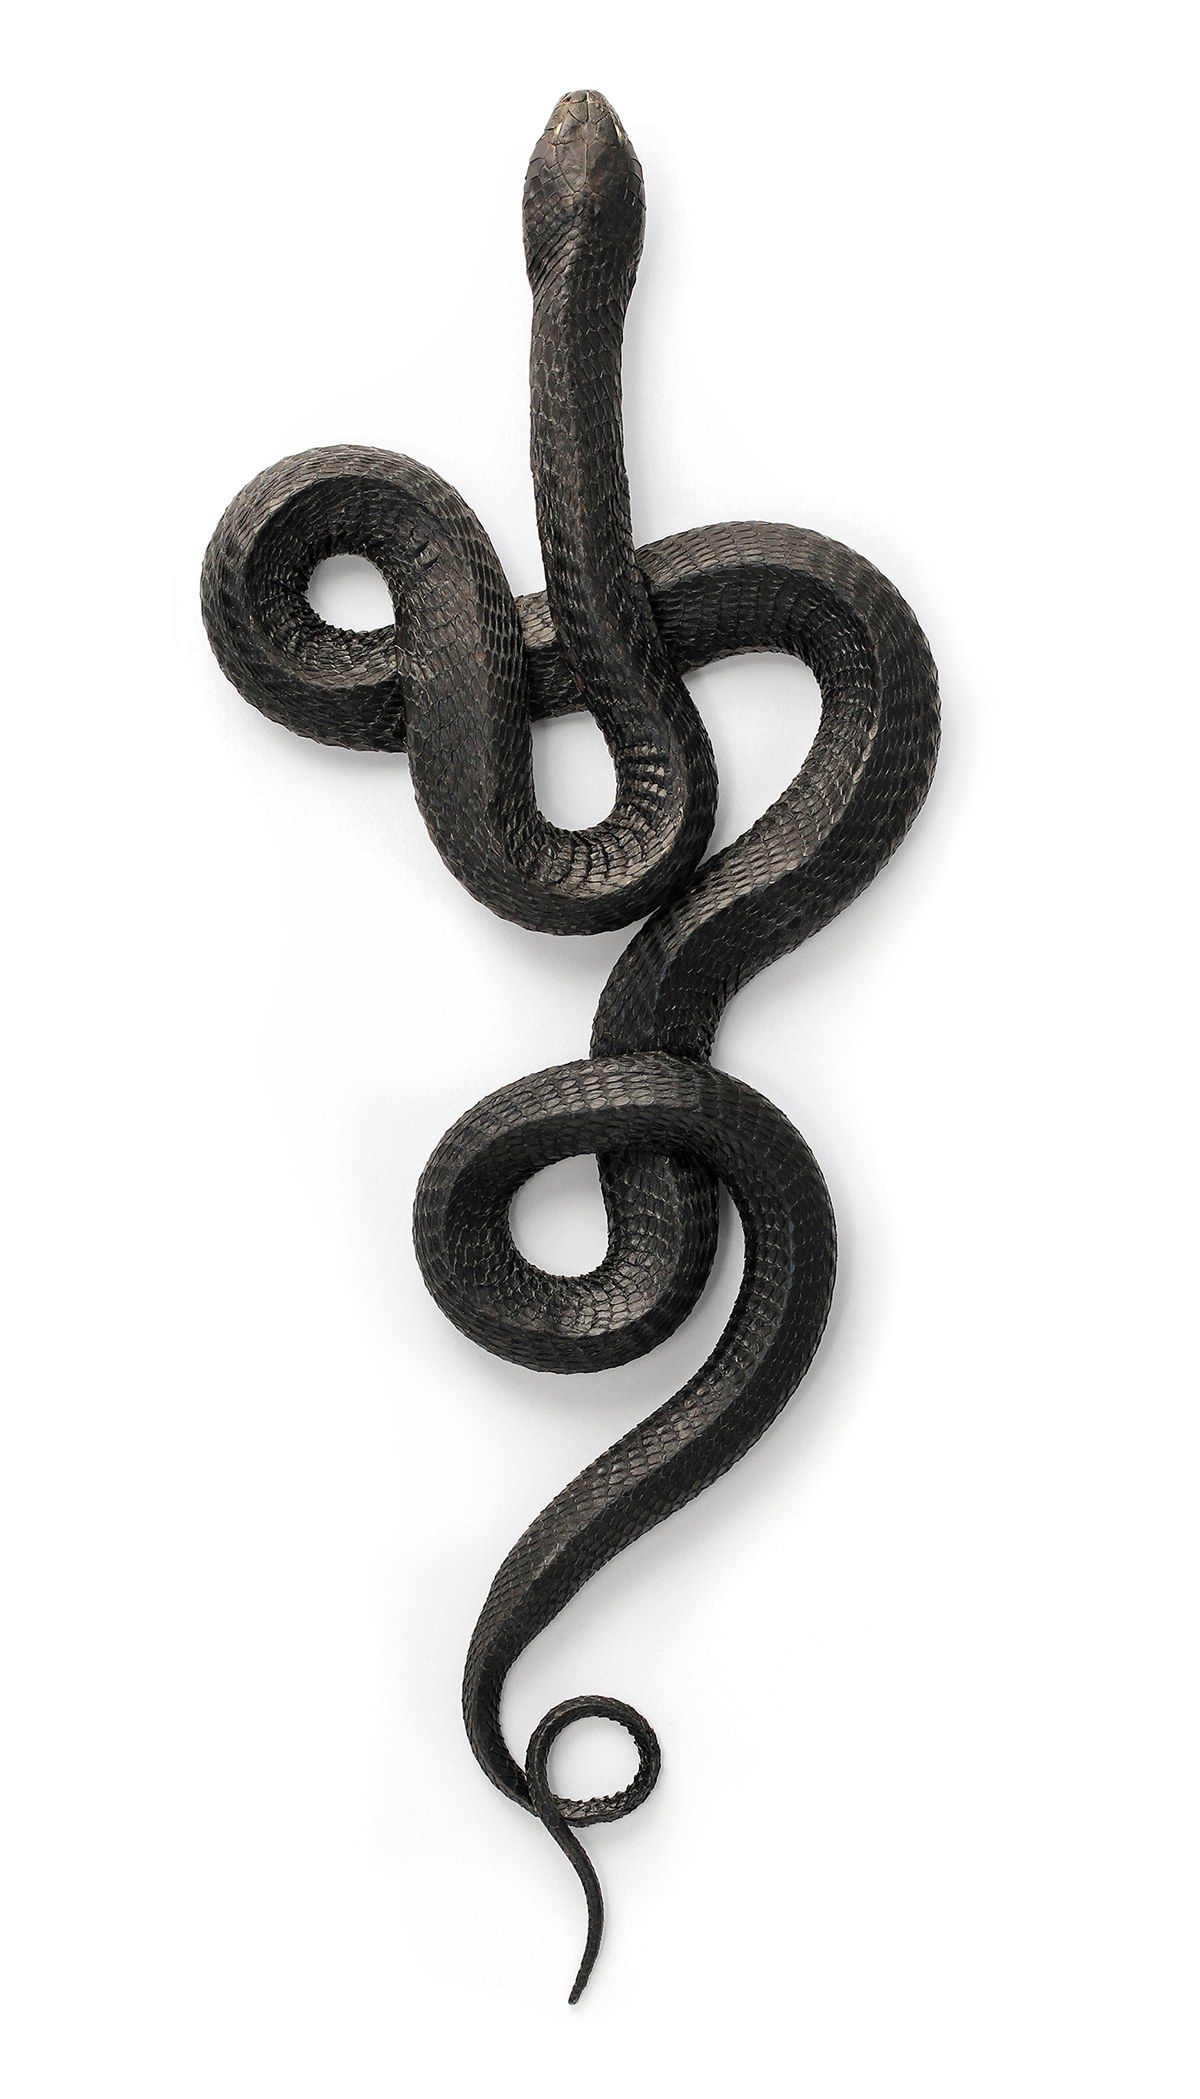 Amazing Photo Reveal How the Natural World Copies Itself. Snake drawing, Snake tattoo, Snake